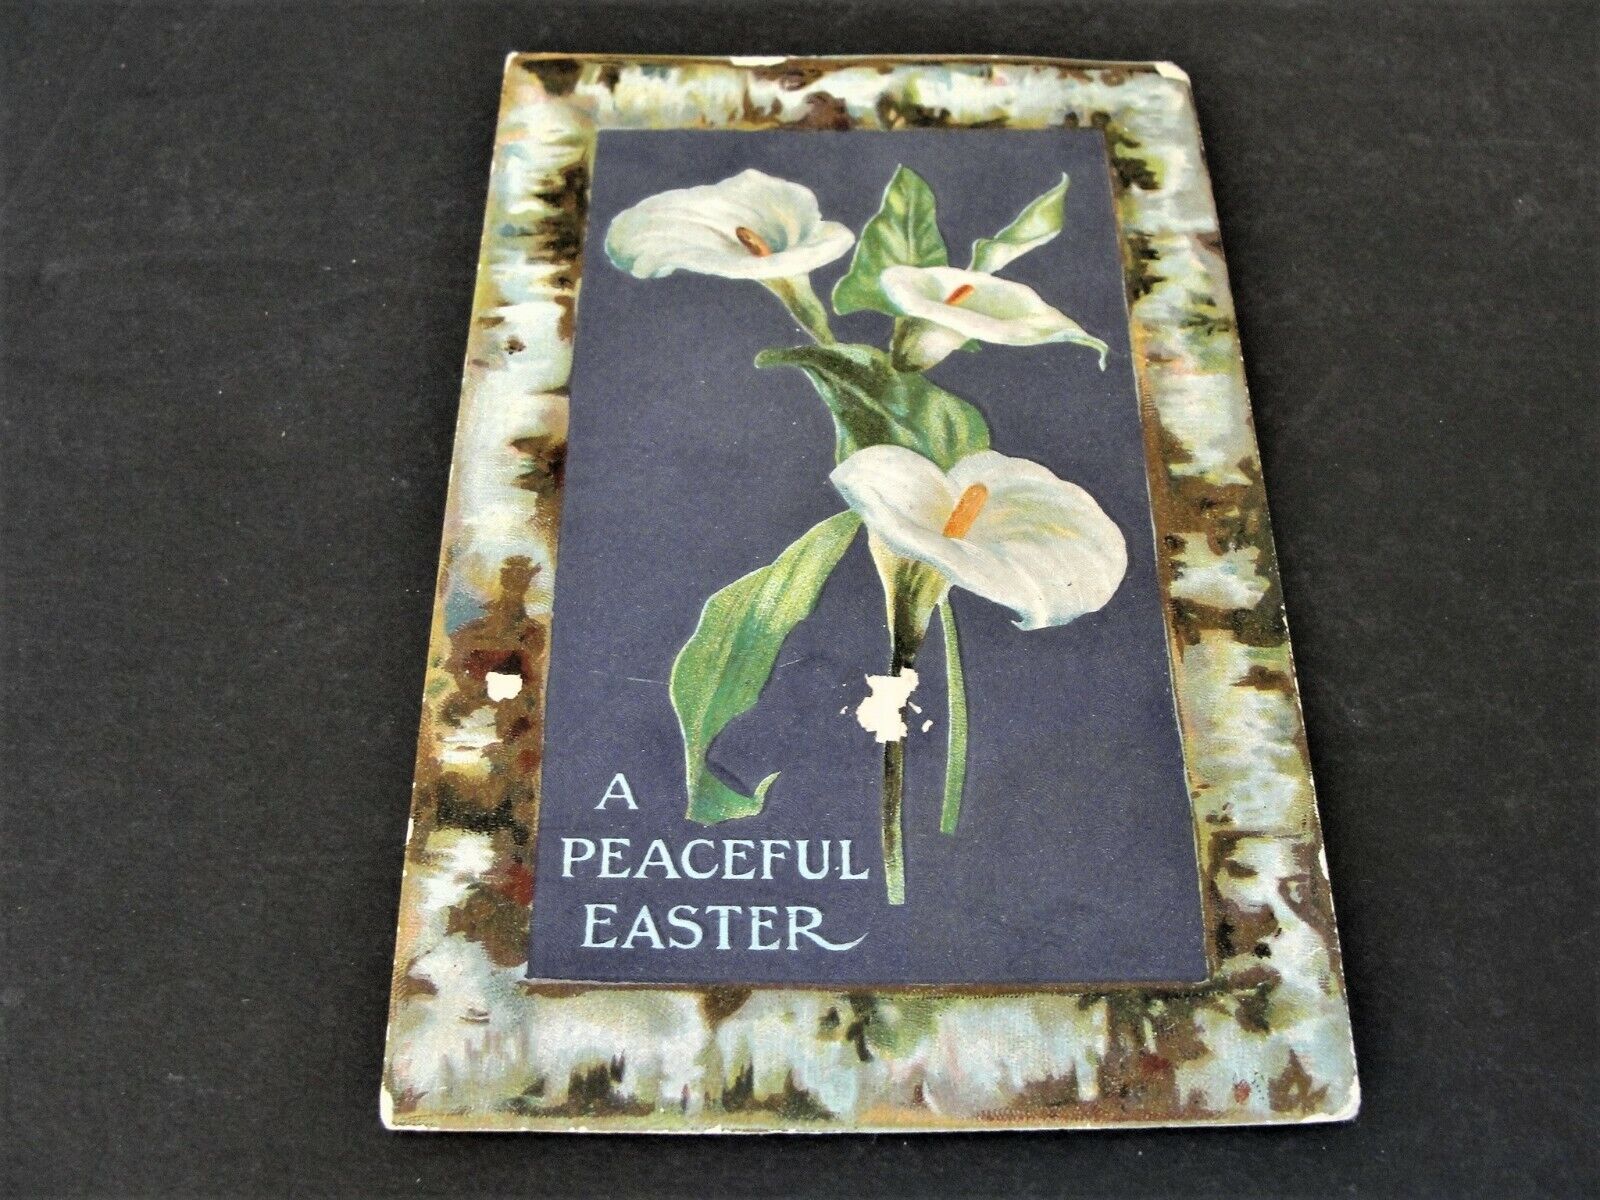  A Peaceful Easter- Unposted, 1900s Divided Back Era-Embossed Postcard.  